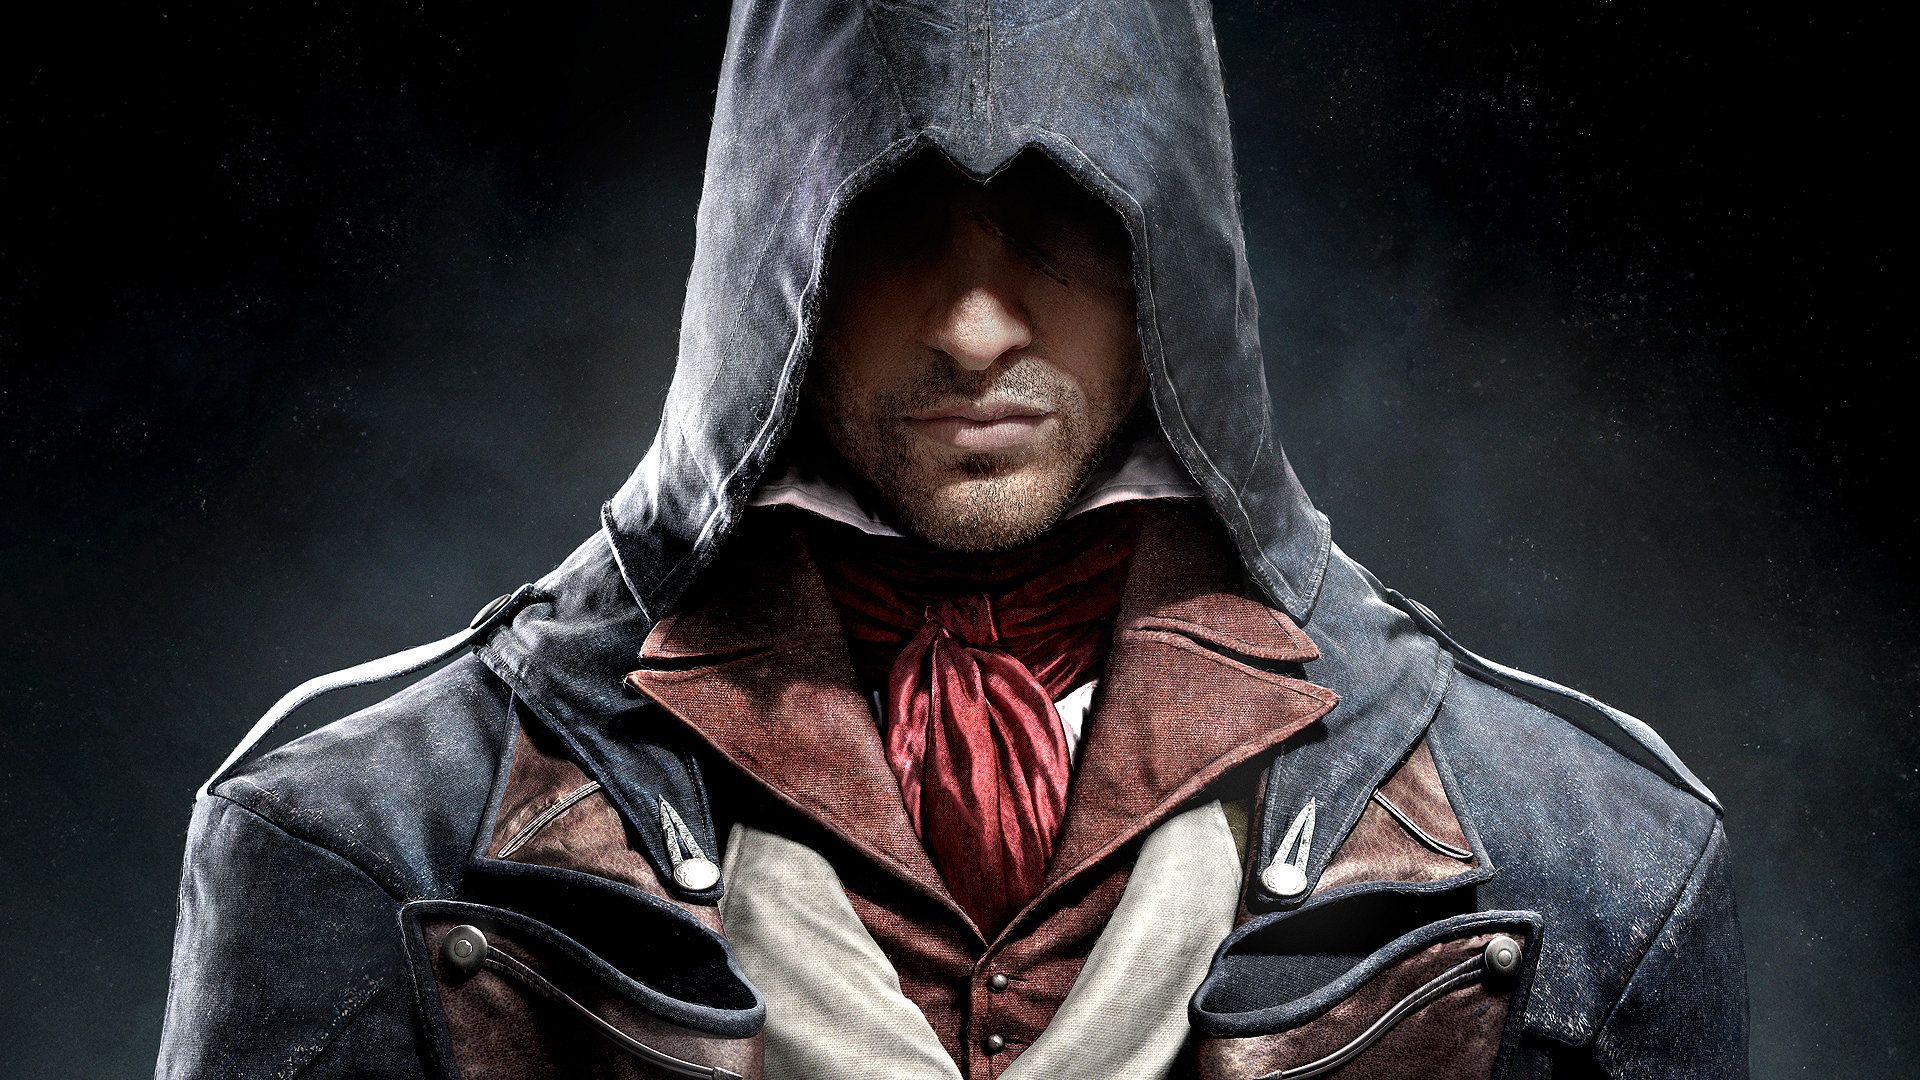 Assassin's Creed Unity Trophies •